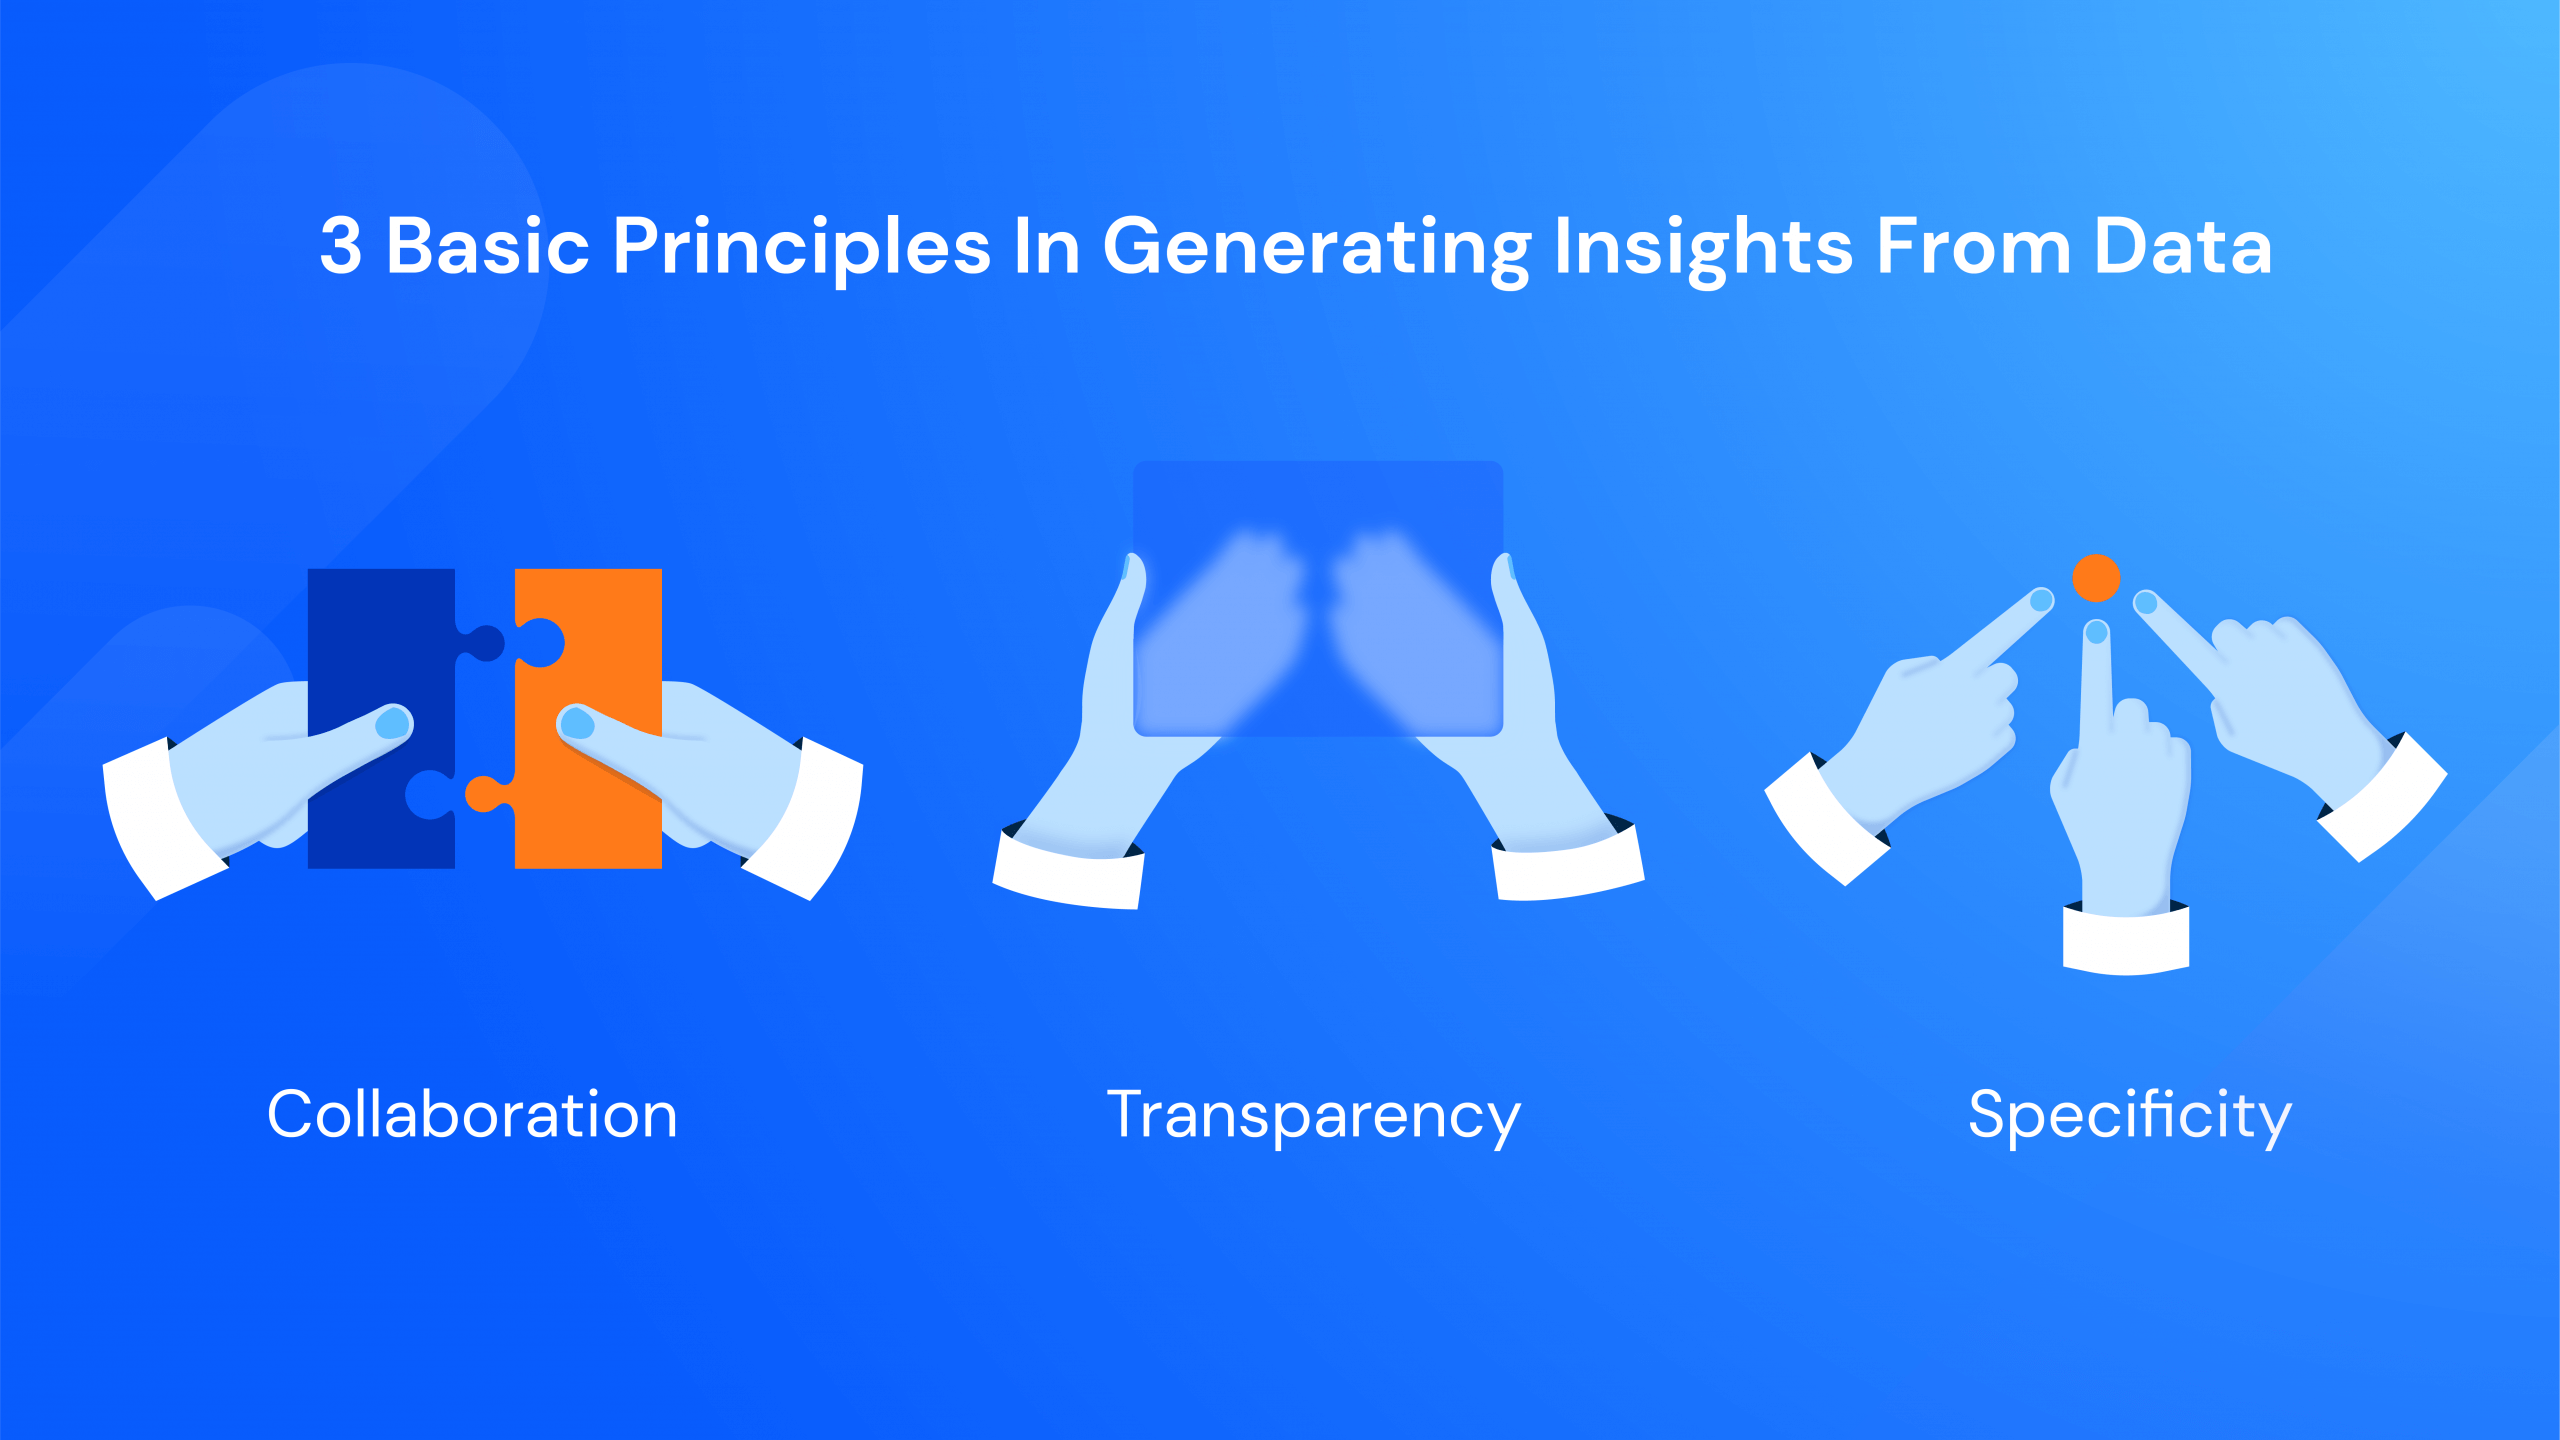 3 principles to generate insights from data.